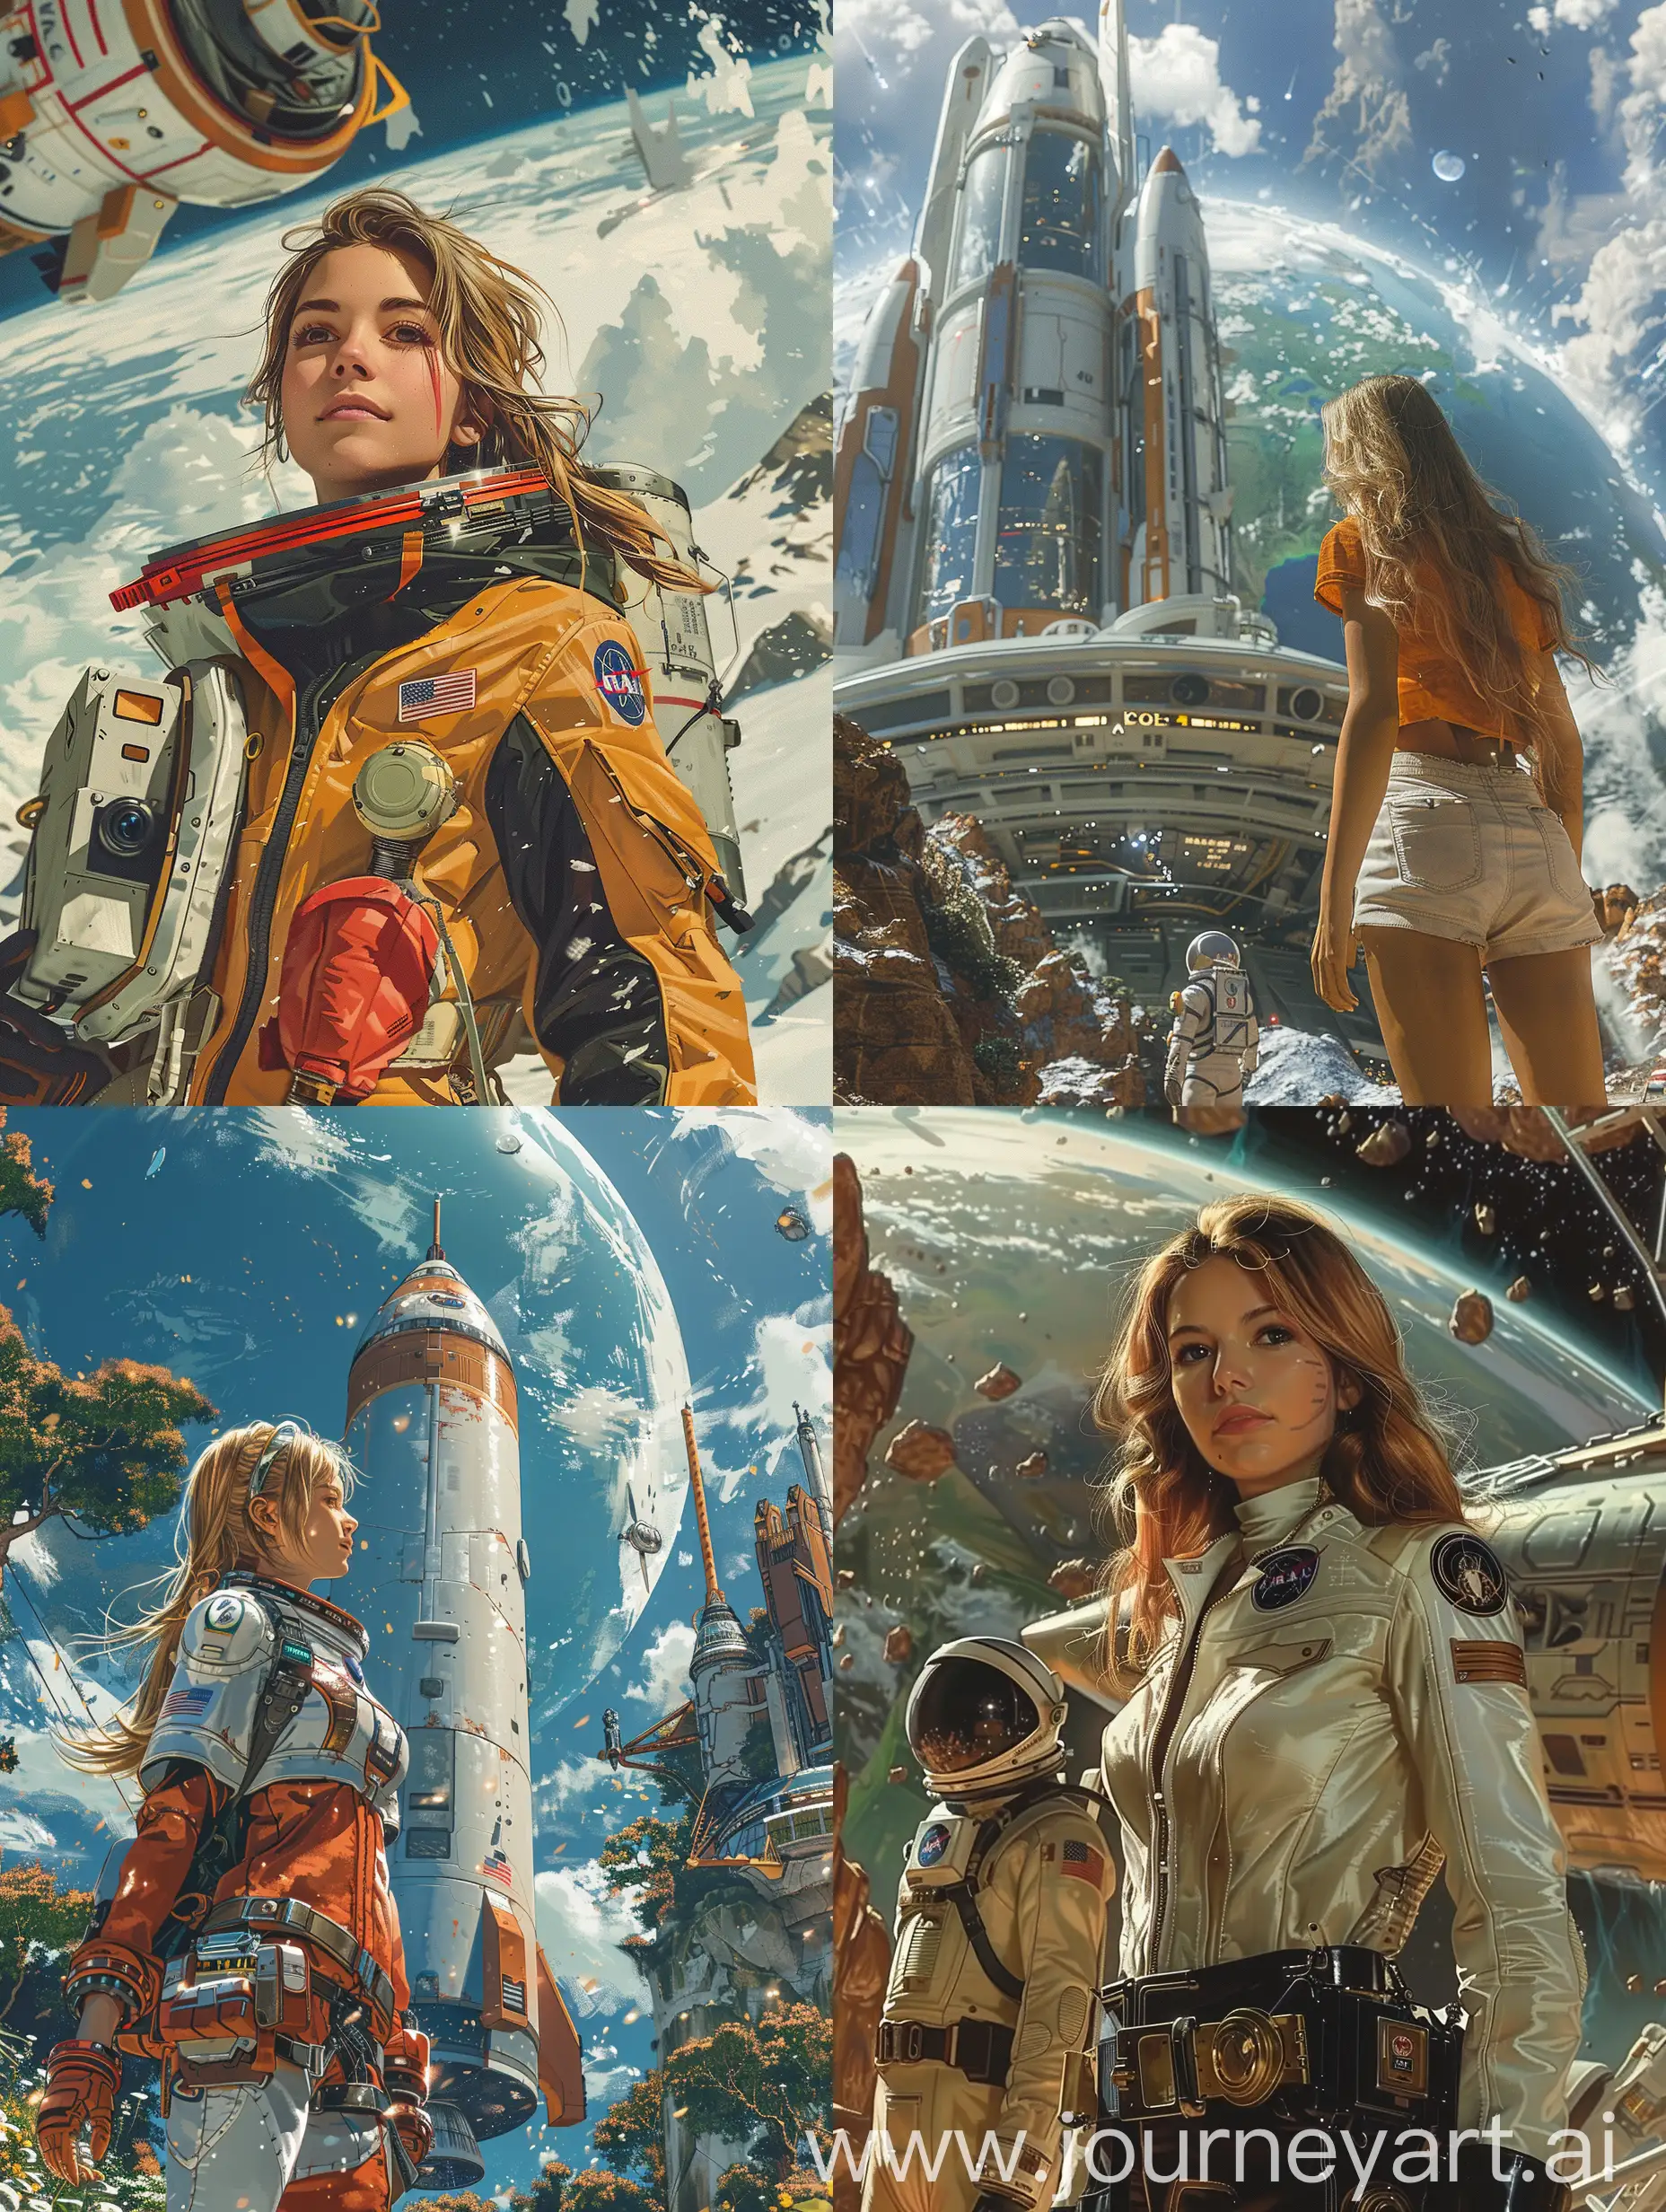 Create a visually exciting and challenging illustration in a realistic fantastic style of a beautiful young woman Space Nomad and Wanderer and asronaut in front of a spaceship explores awesome earth. The illustration should depict a scene show grand scale, and incorporate influences from cosmoopera in comic style --s 750